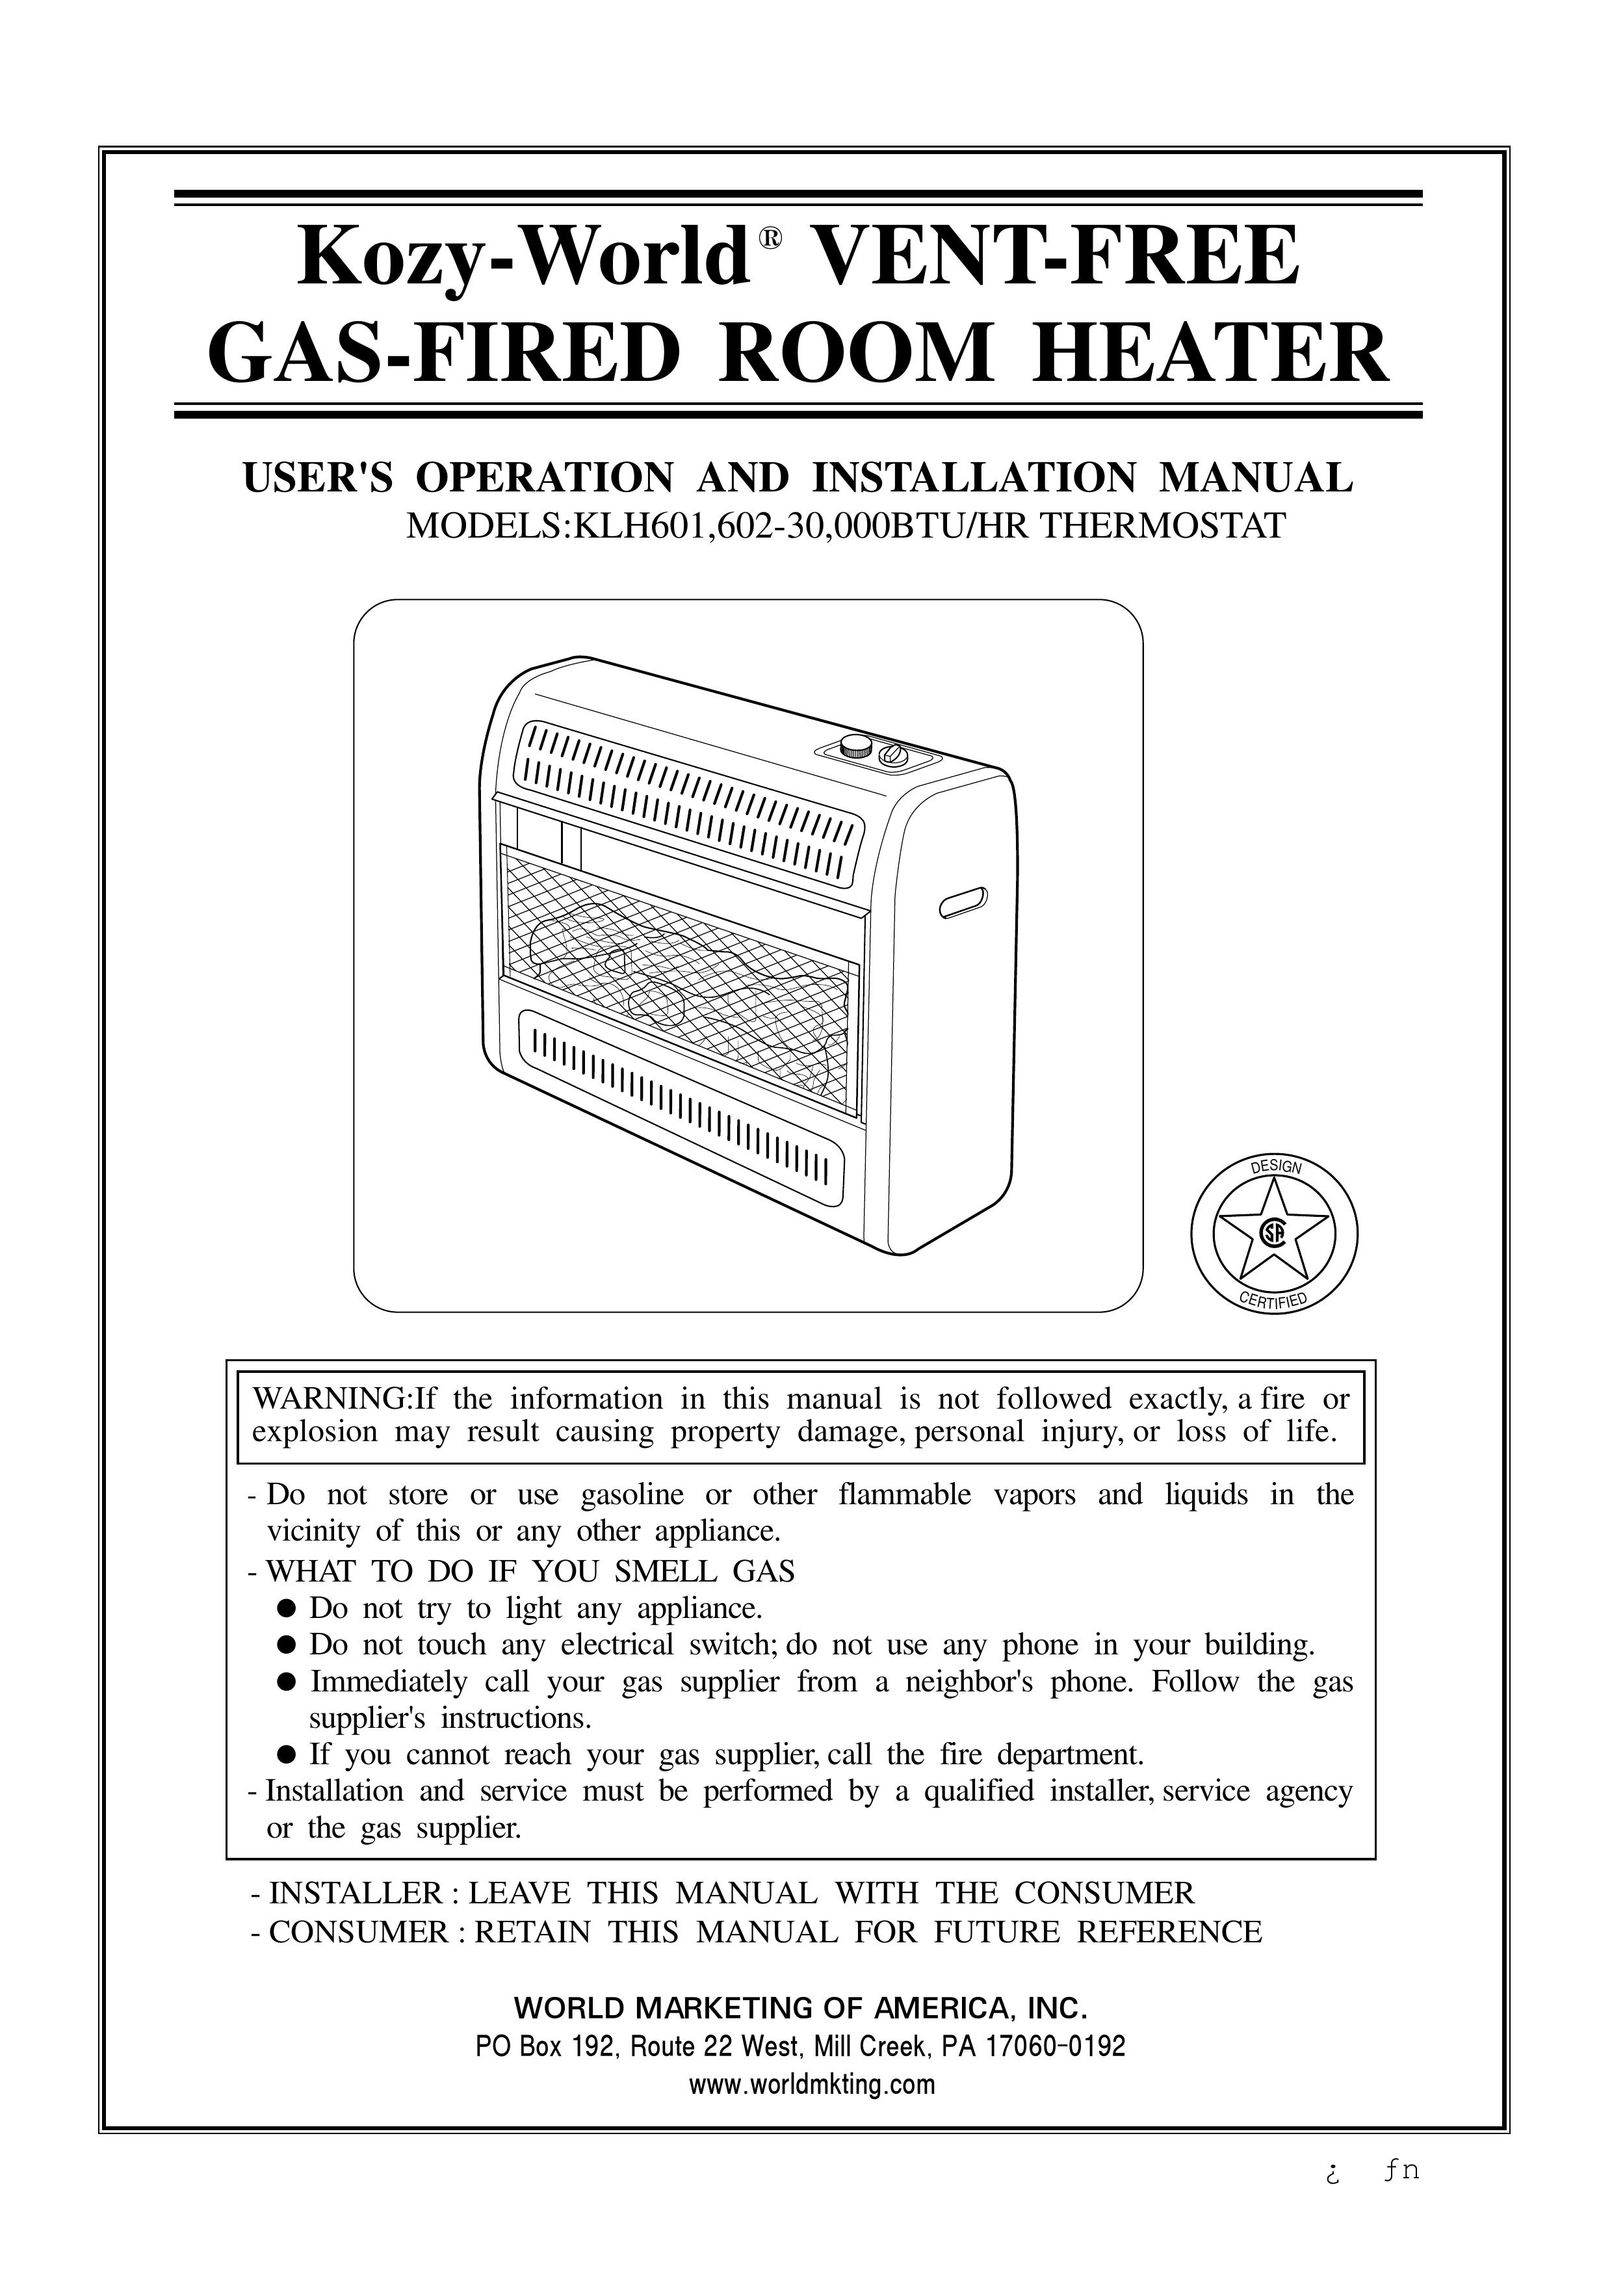 Gas-Fired Products 602-30 Electric Heater User Manual